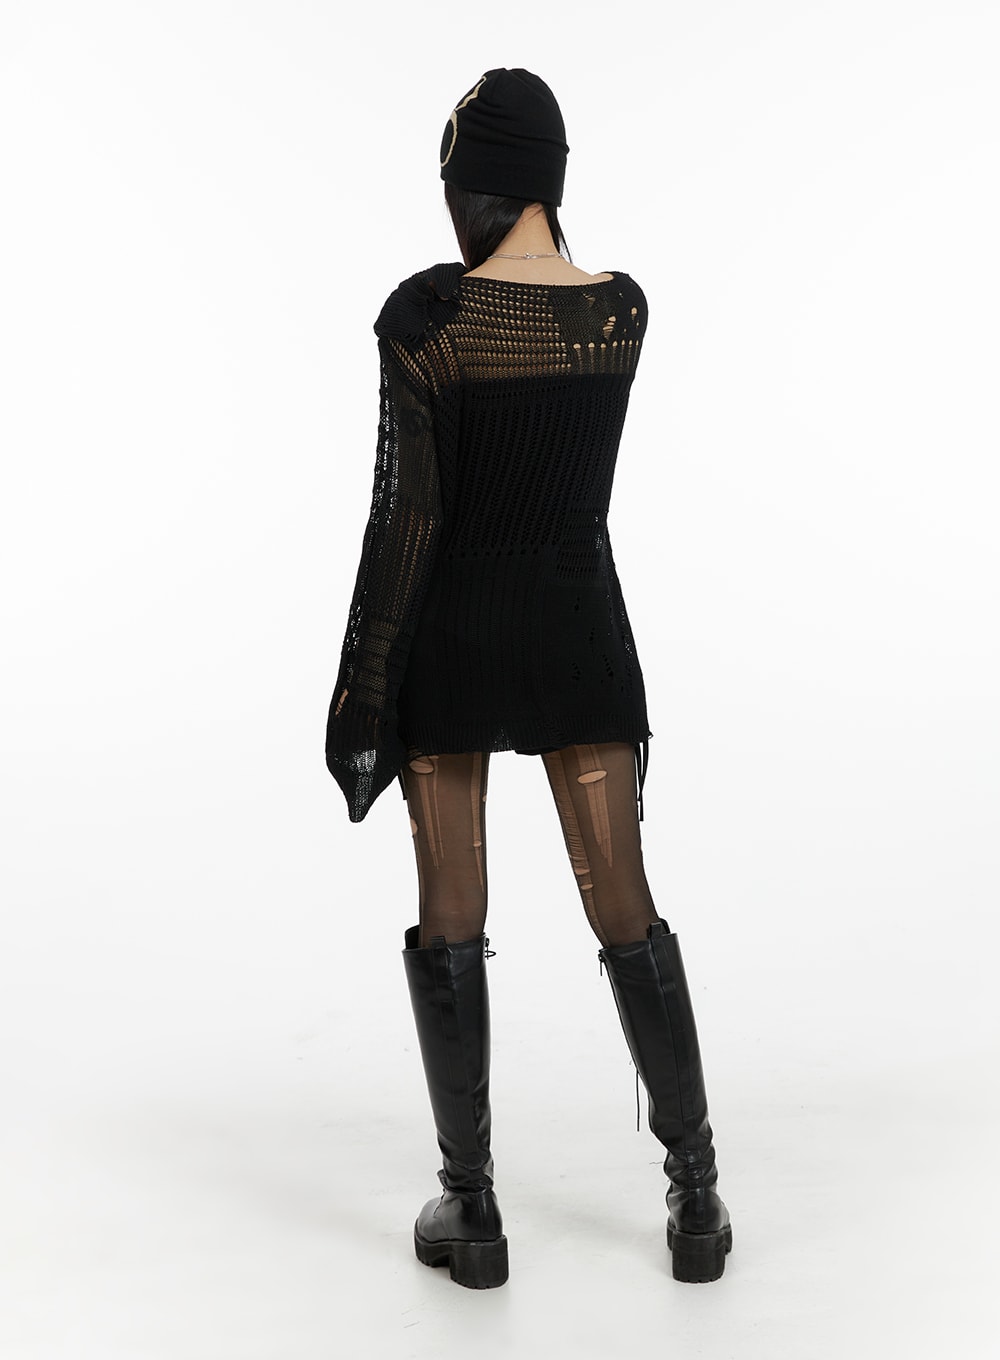 Black V Neck Rib Knit Crop Top Fairy Core Witch Core Grunge